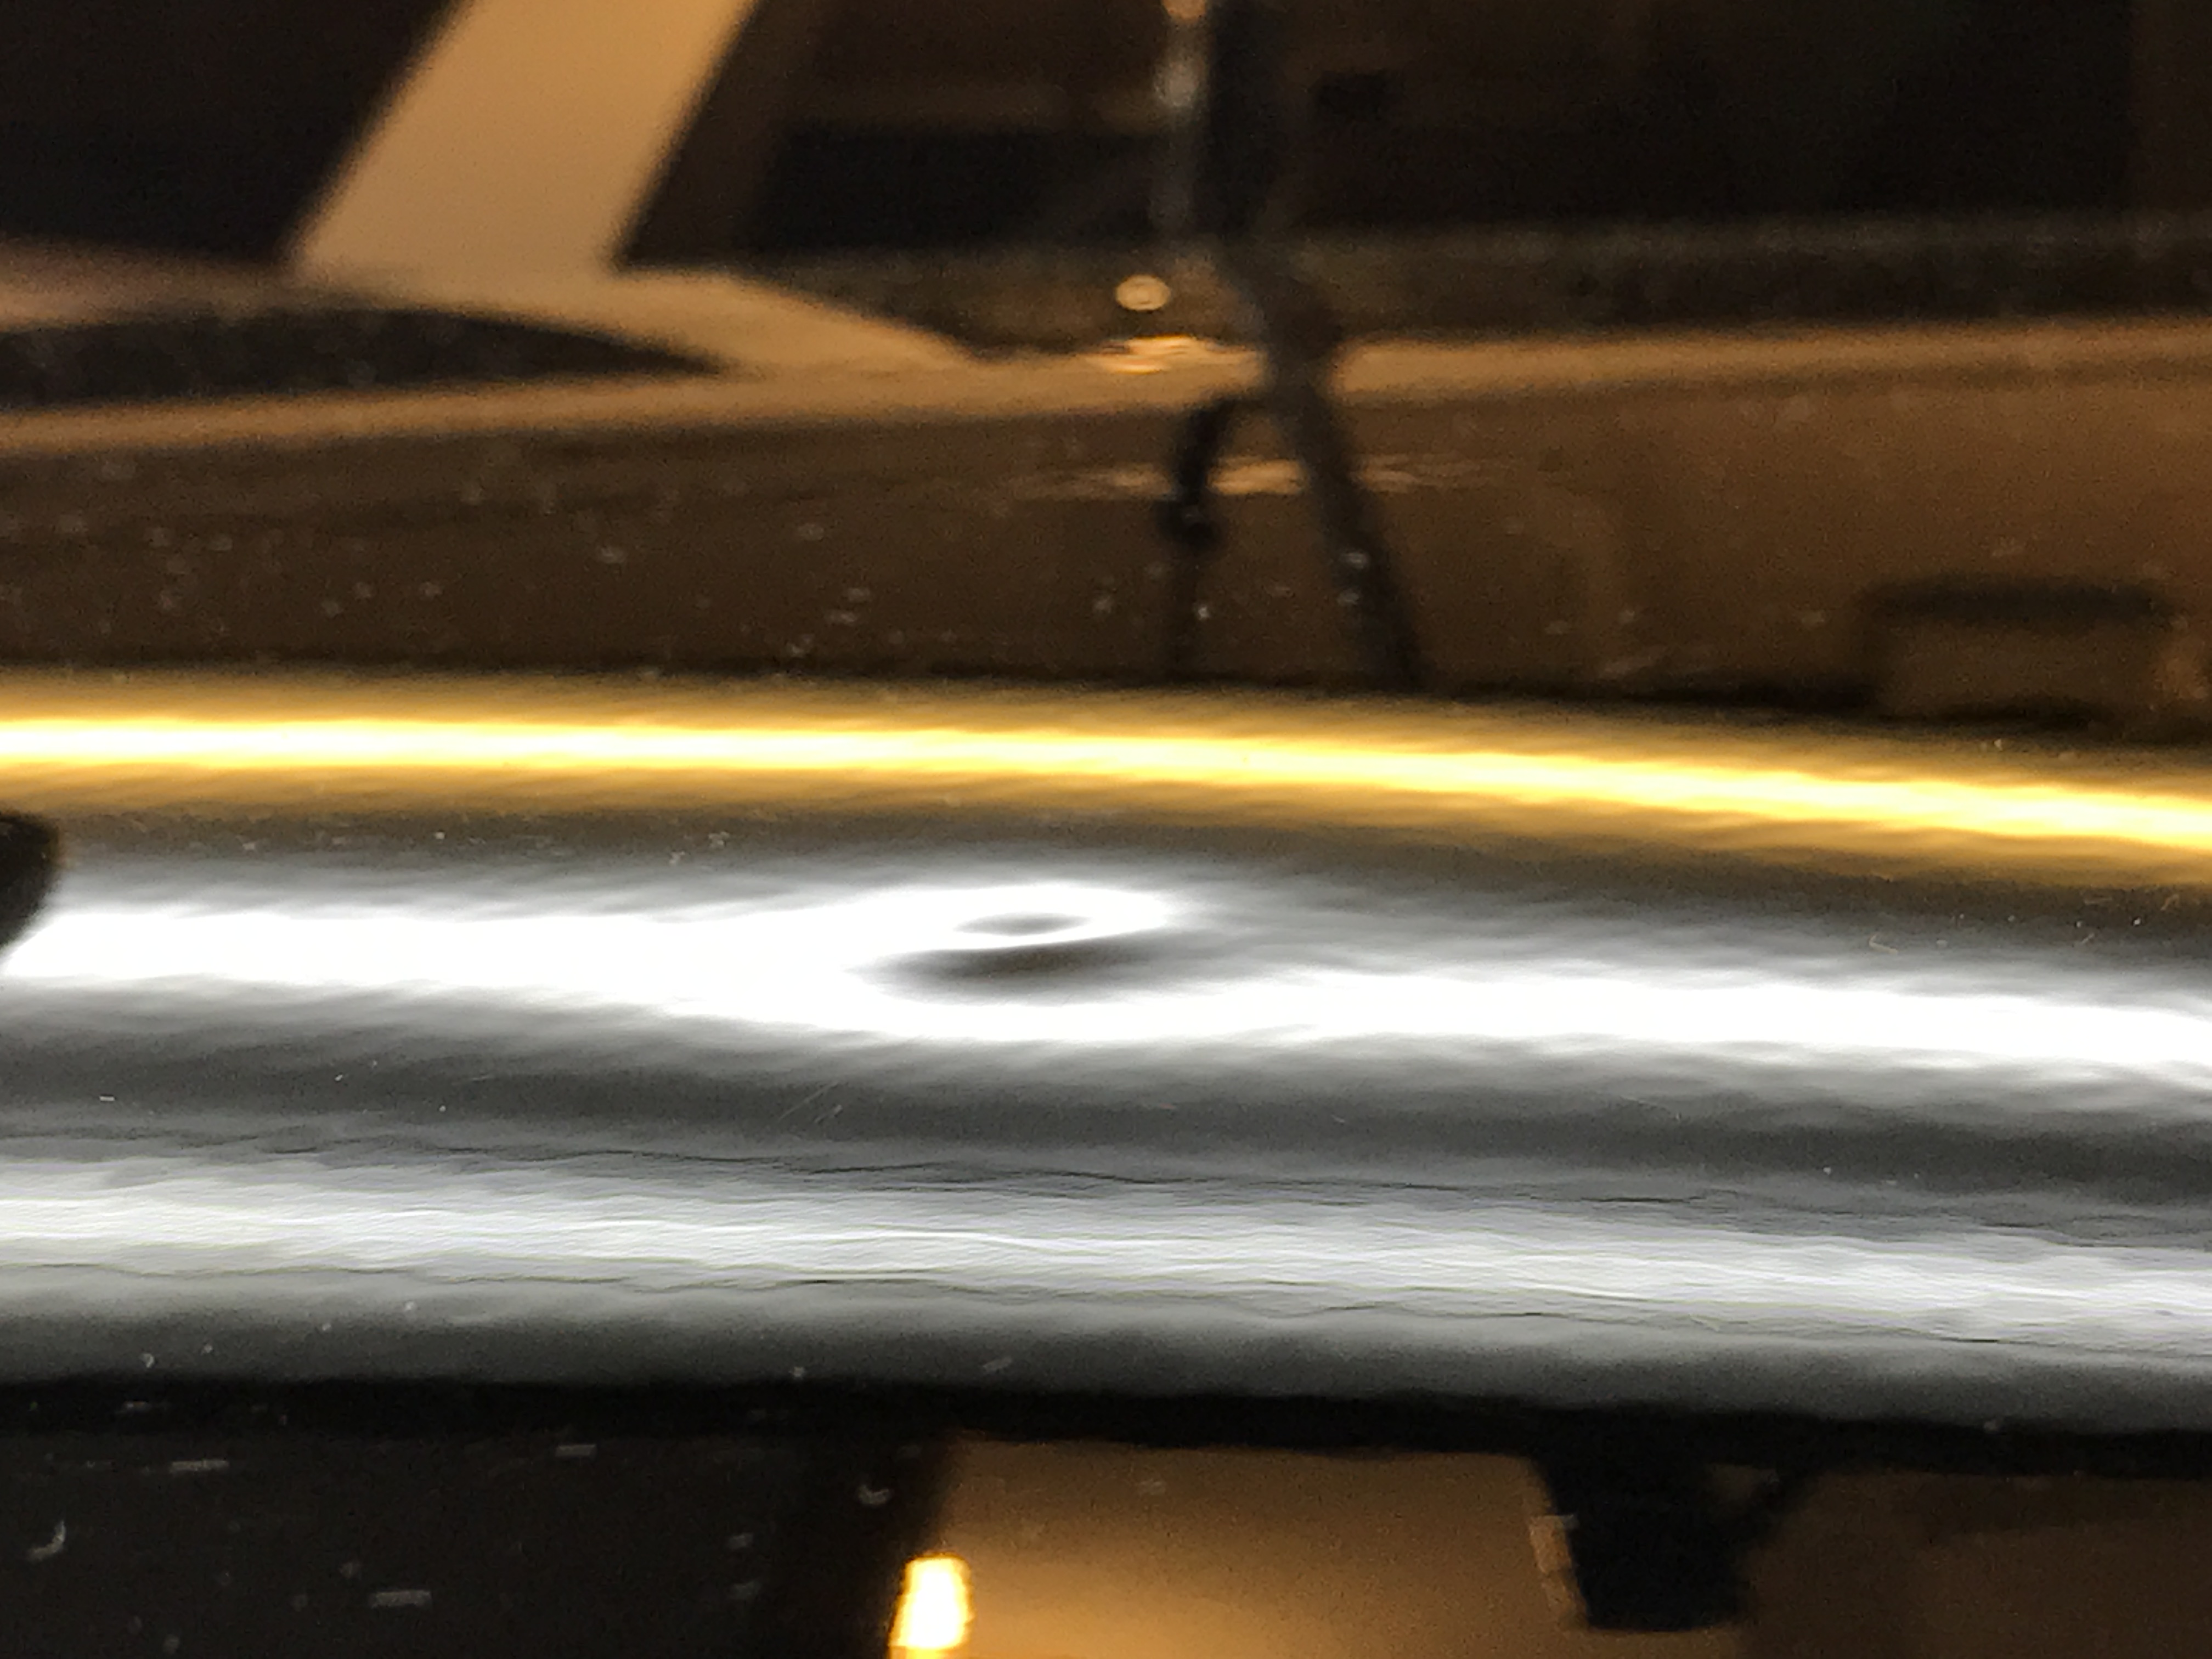 Acorn Damage on roof of this 2016 Cadillac ATS under the inspection lights of the Paintless dent removal process. Michael Bocek out of Springfield, IL was able to remove this dent with ease. http://217Dent.com Before image under a fog inspection light. for PDR